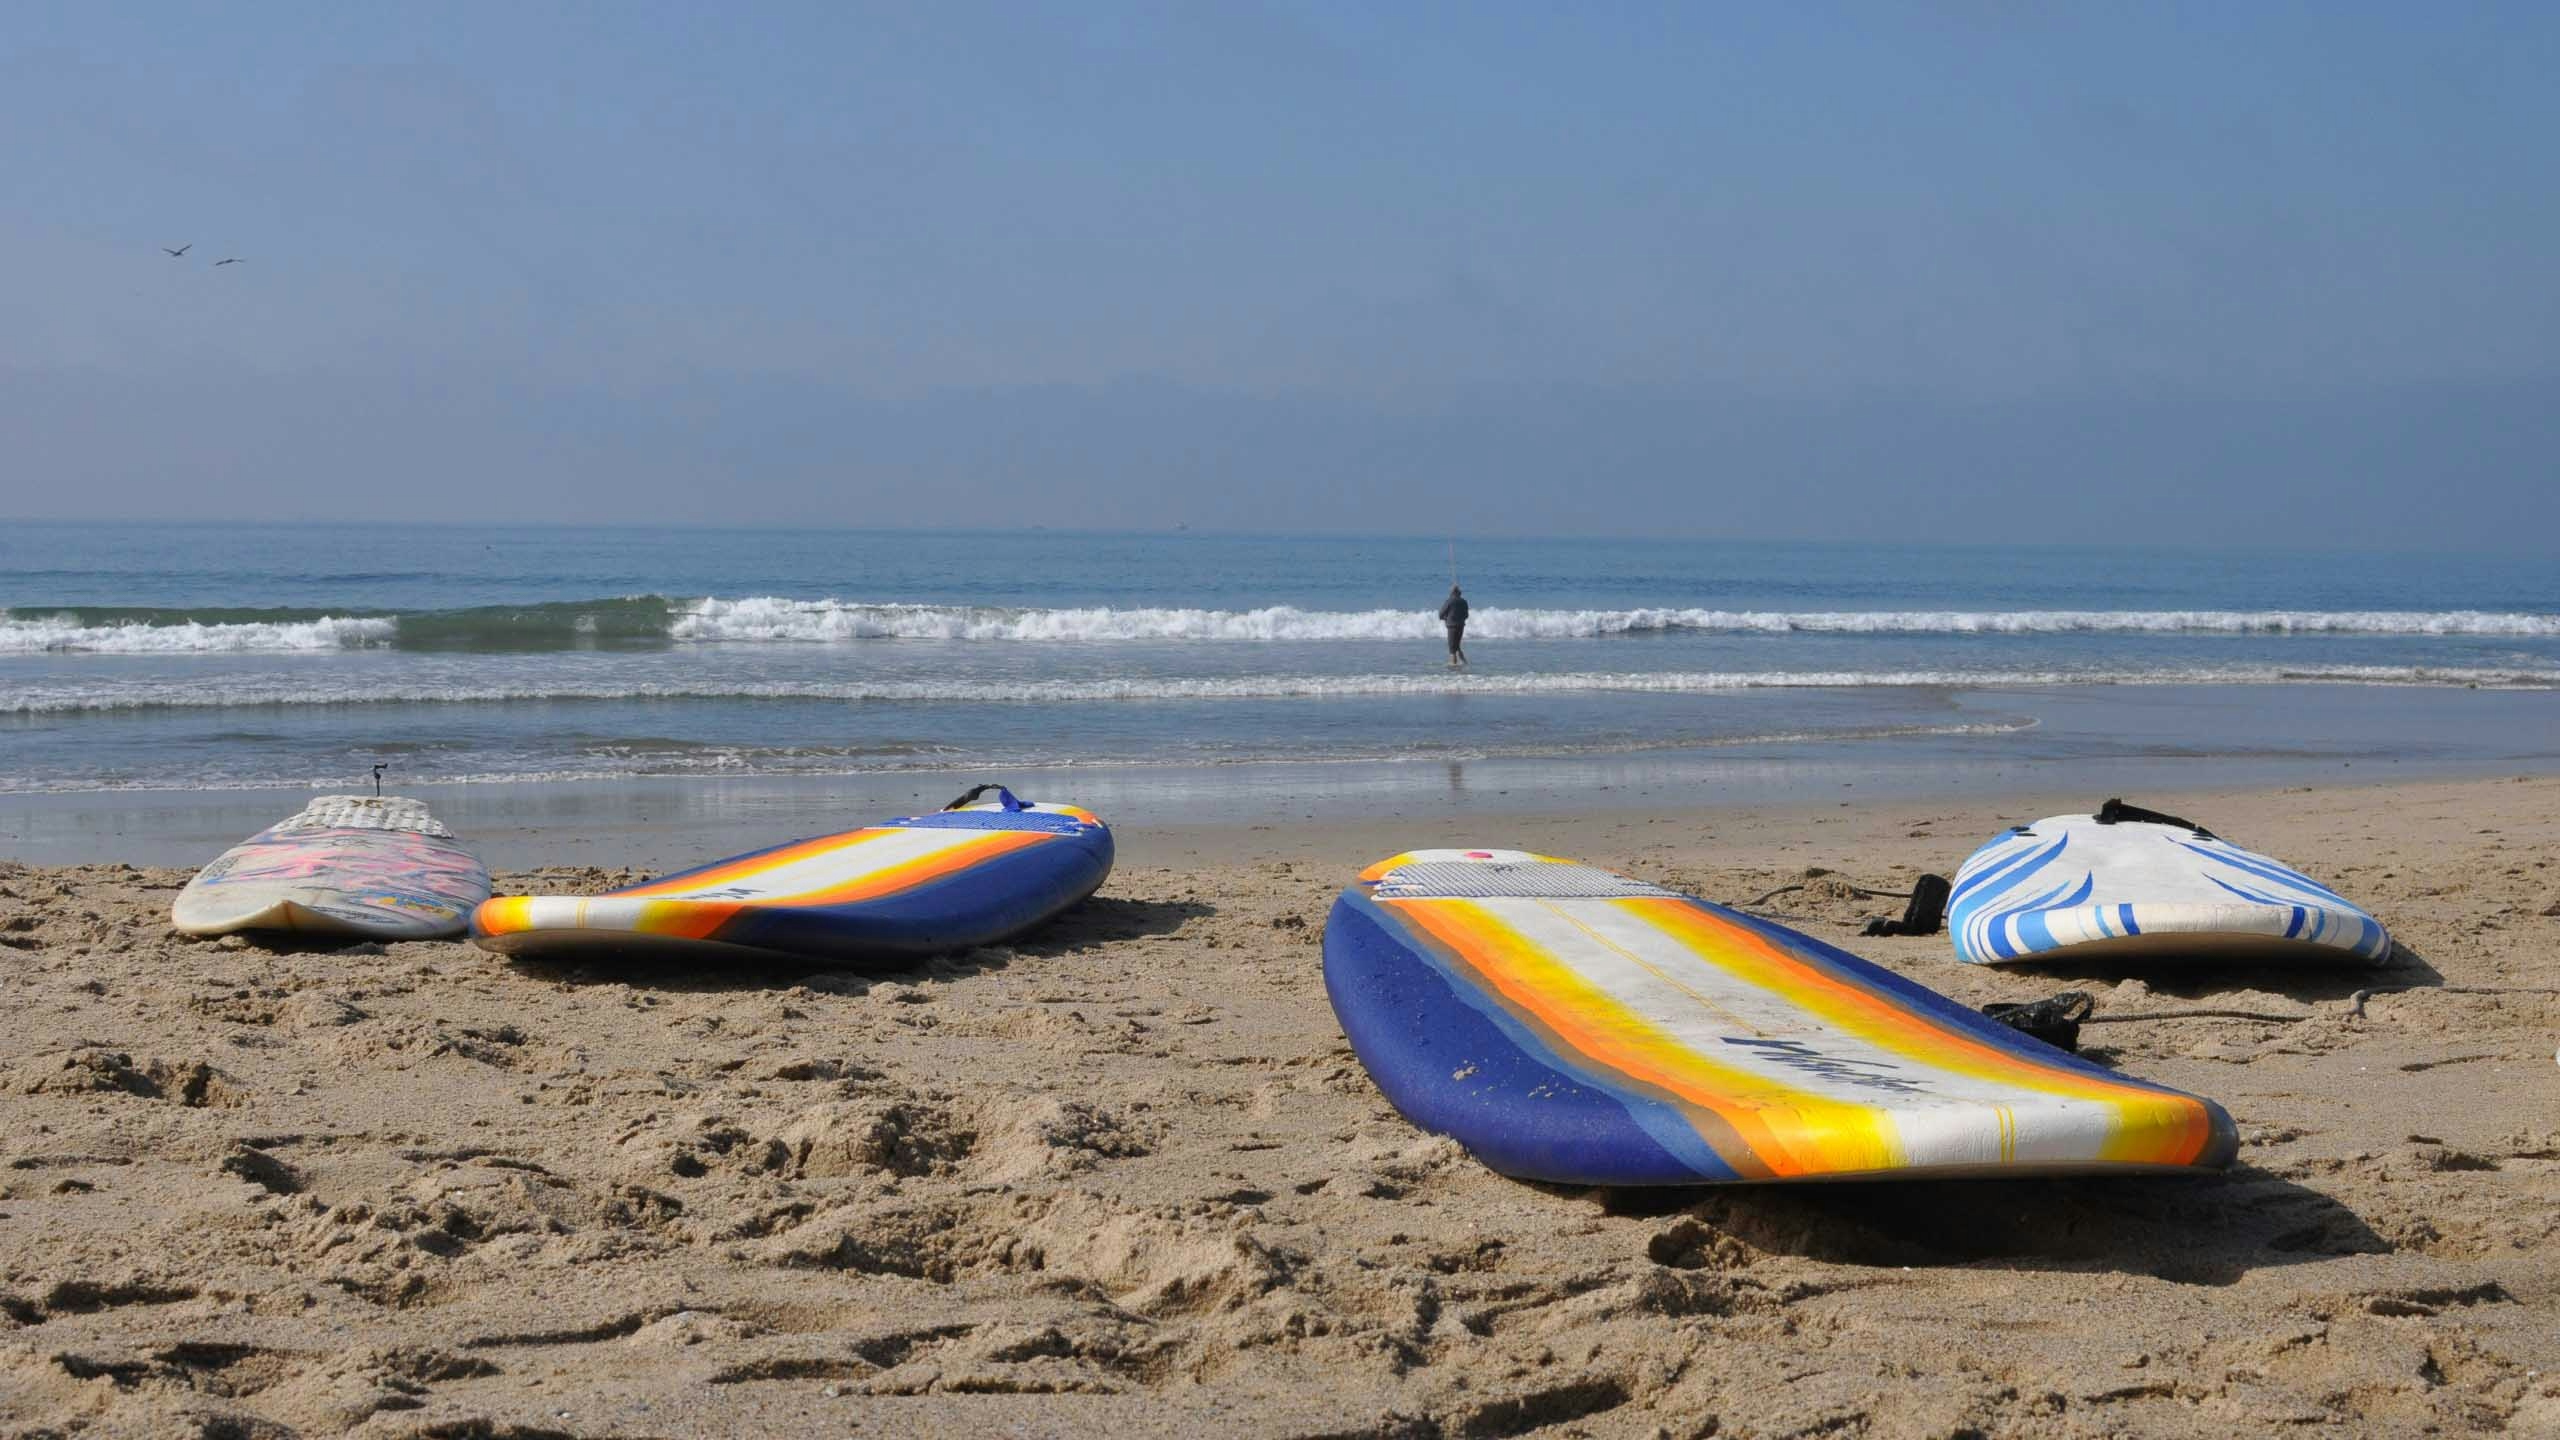 Surfboards on the sand of Will Rogers beach with small waves in the ocean.